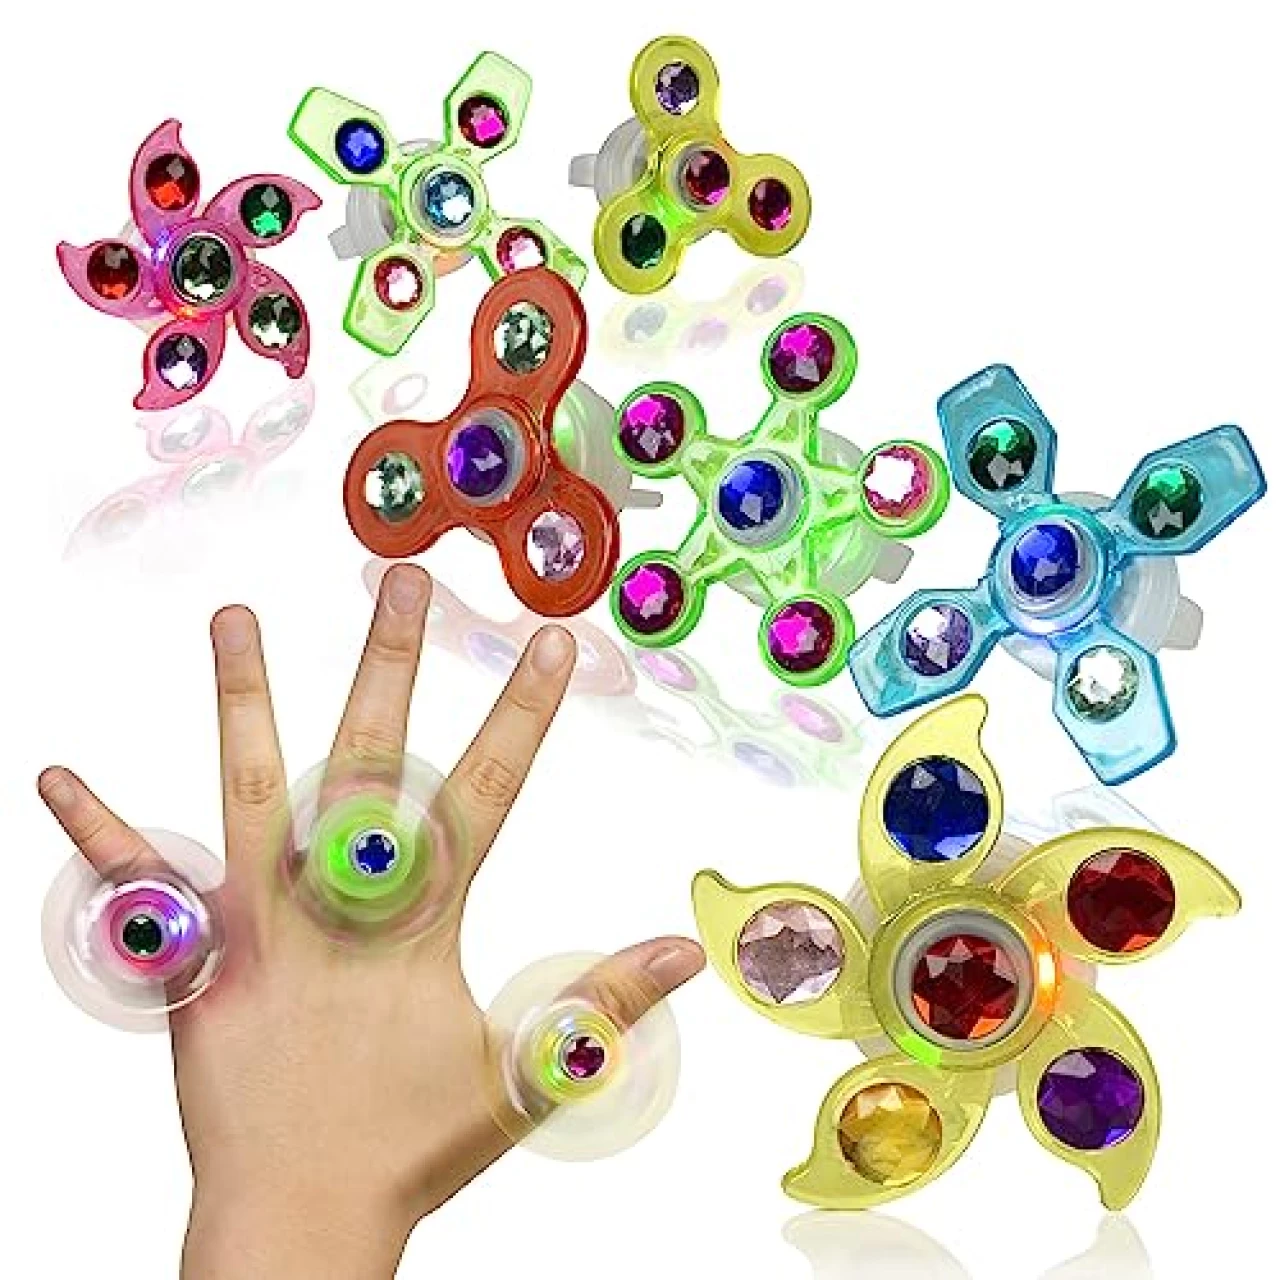 PROLOSO LED Rings Light Up Fidget Toys Glow in The Dark Party Favors Spiral Twister Toys Gyro Flashing Jewelry 24 Pcs